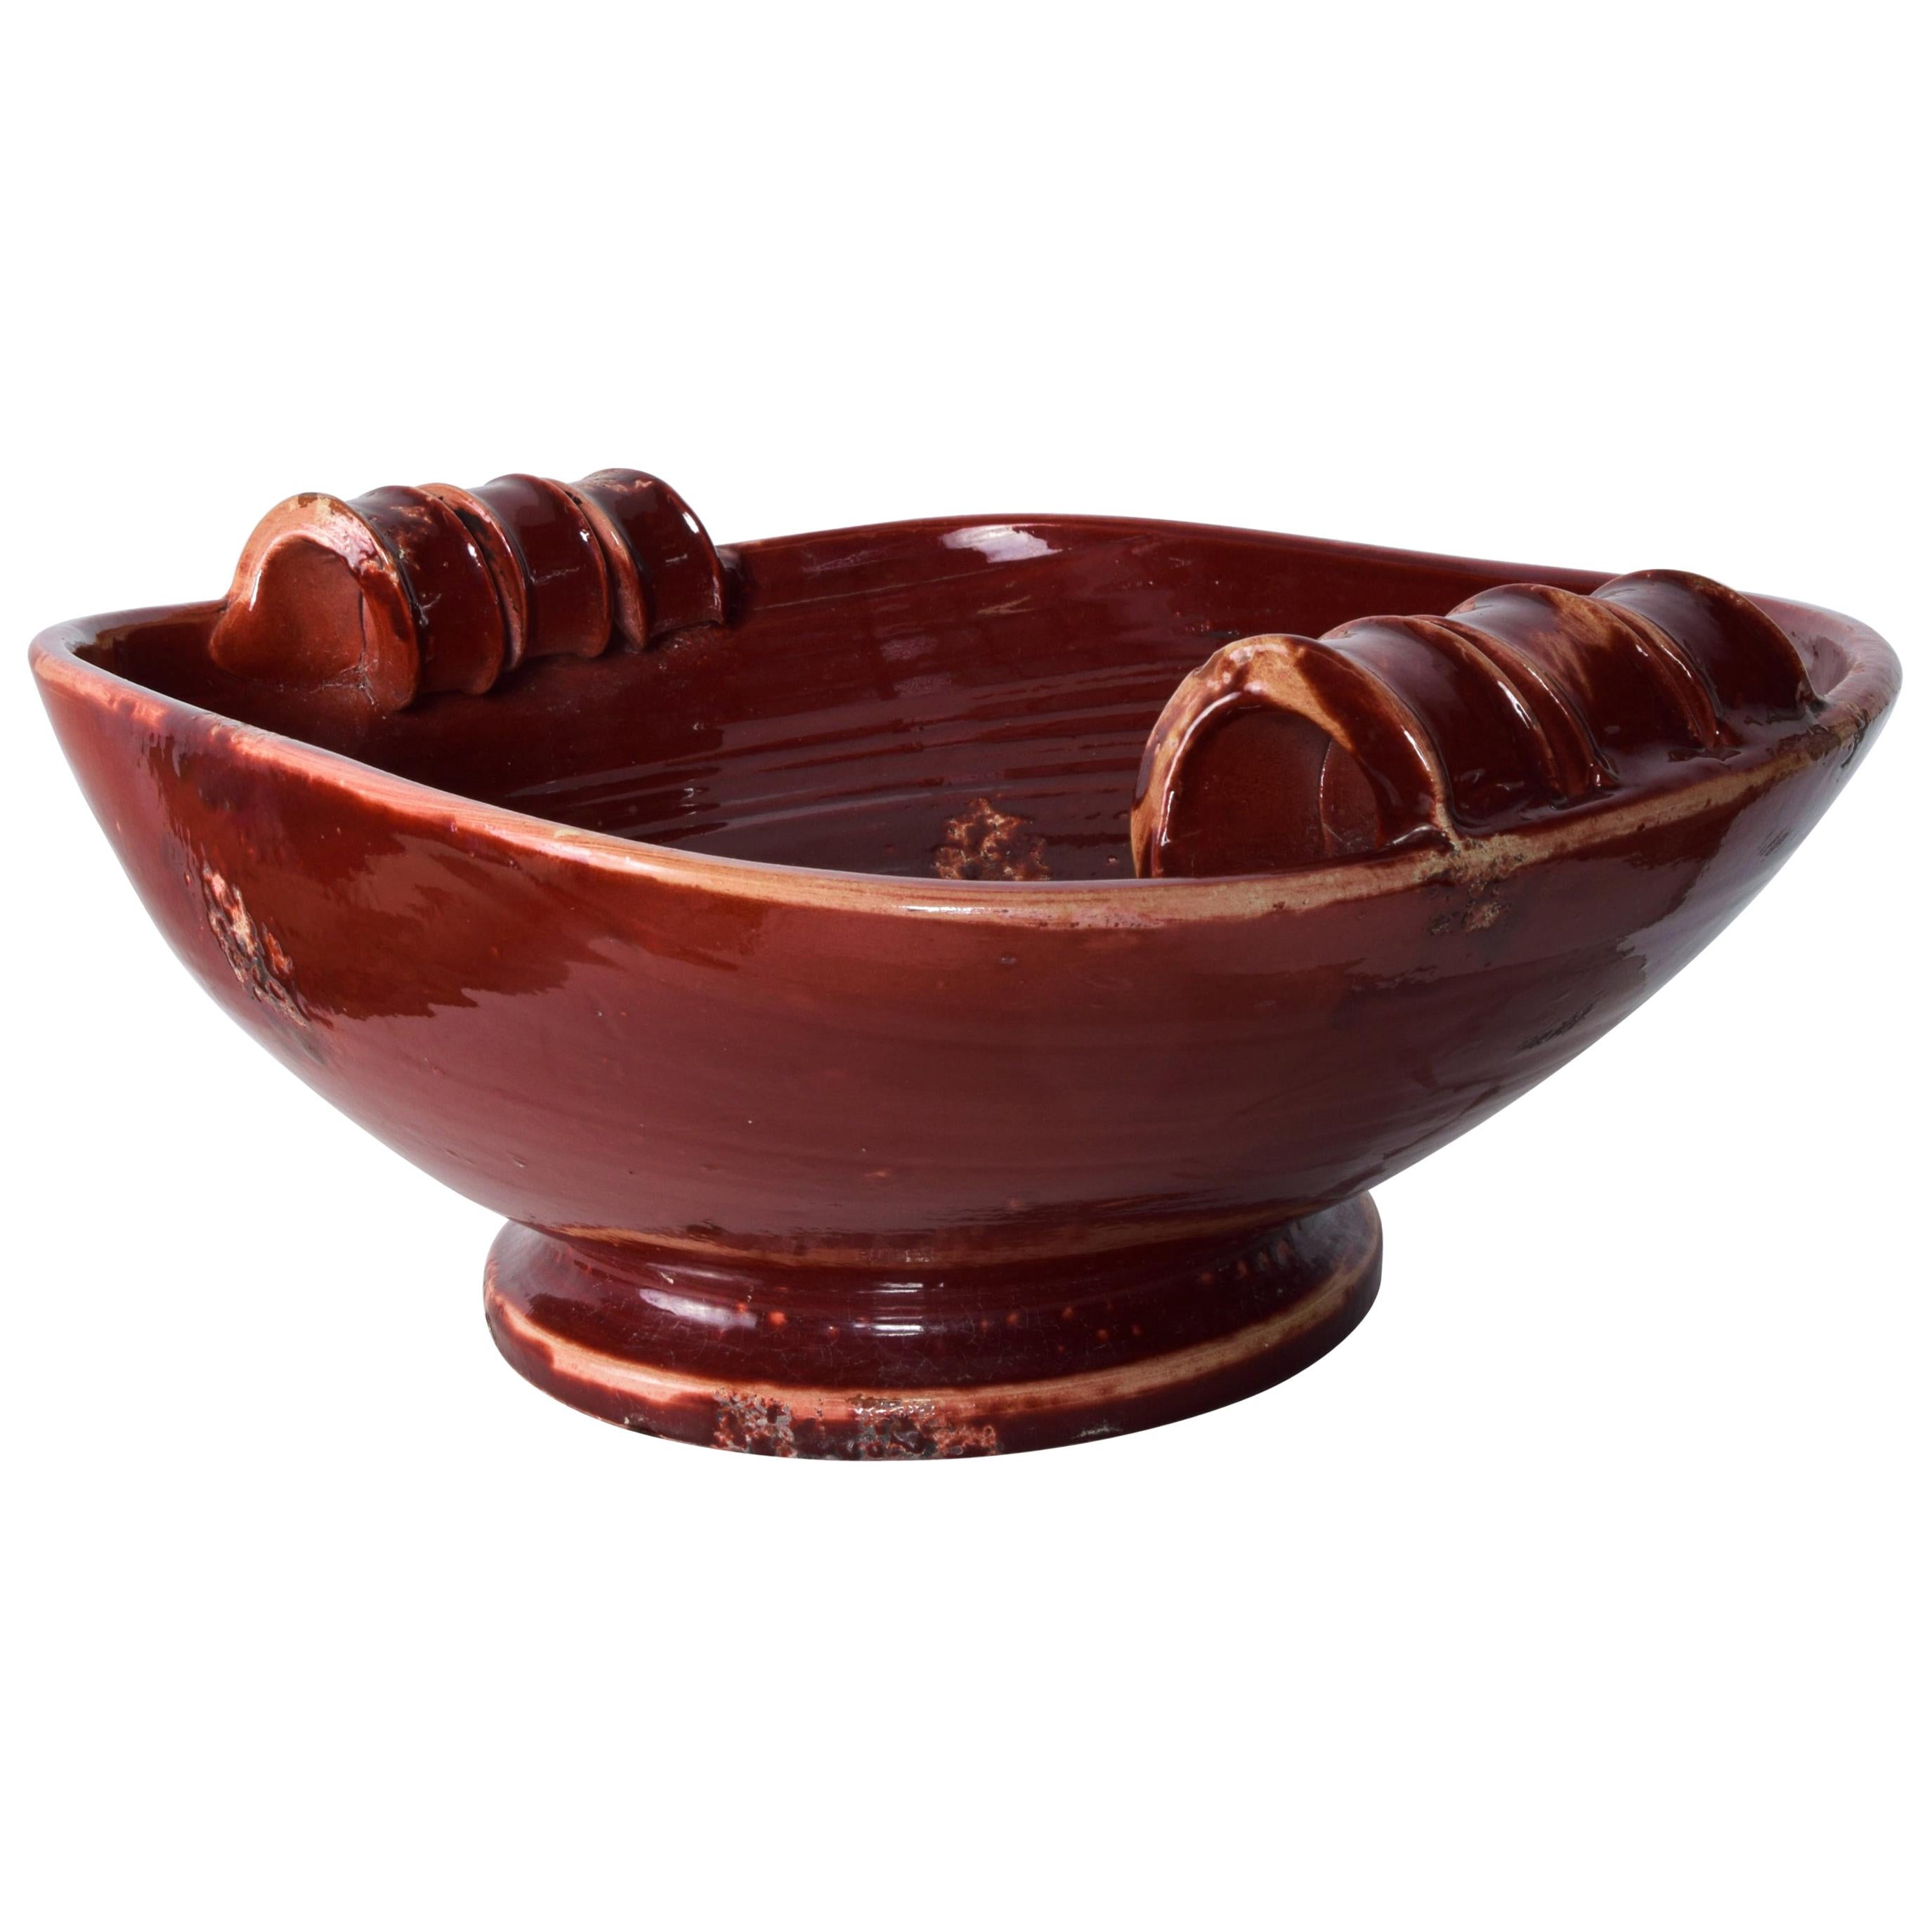 Italian Pottery Tuscany Large Sculptural Red Bowl
Maker stamp For Fortunata made in Tuscany Italy.
Fabulous French Italian Design
9 h x 16.5 d x 22.25 w
Original vintage unrestored condition. 
Refer to images.